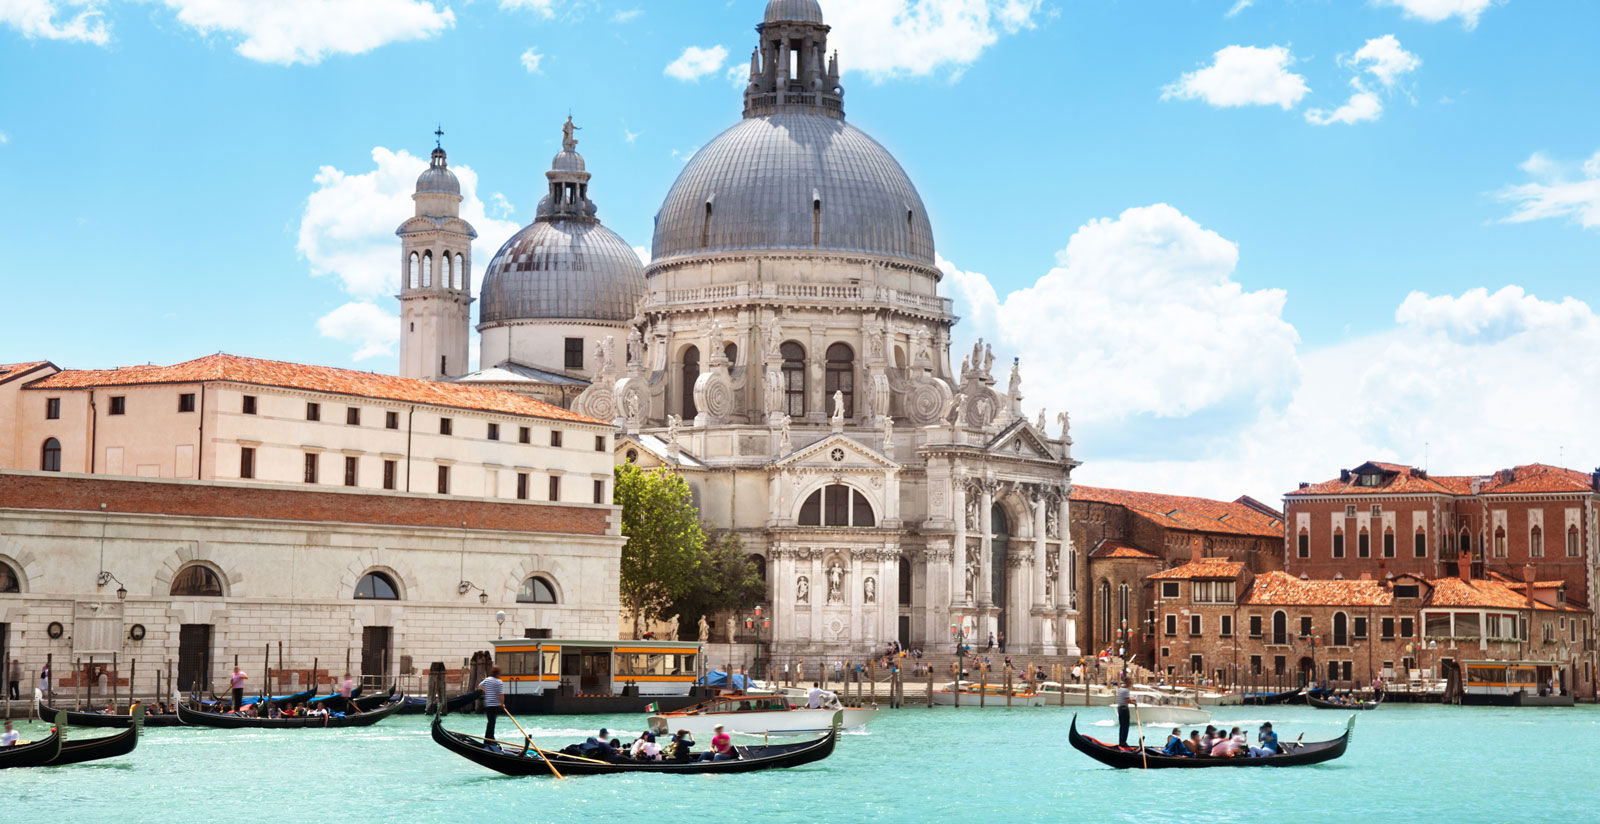 Hotel San Giorgio - What to see in Venice 3